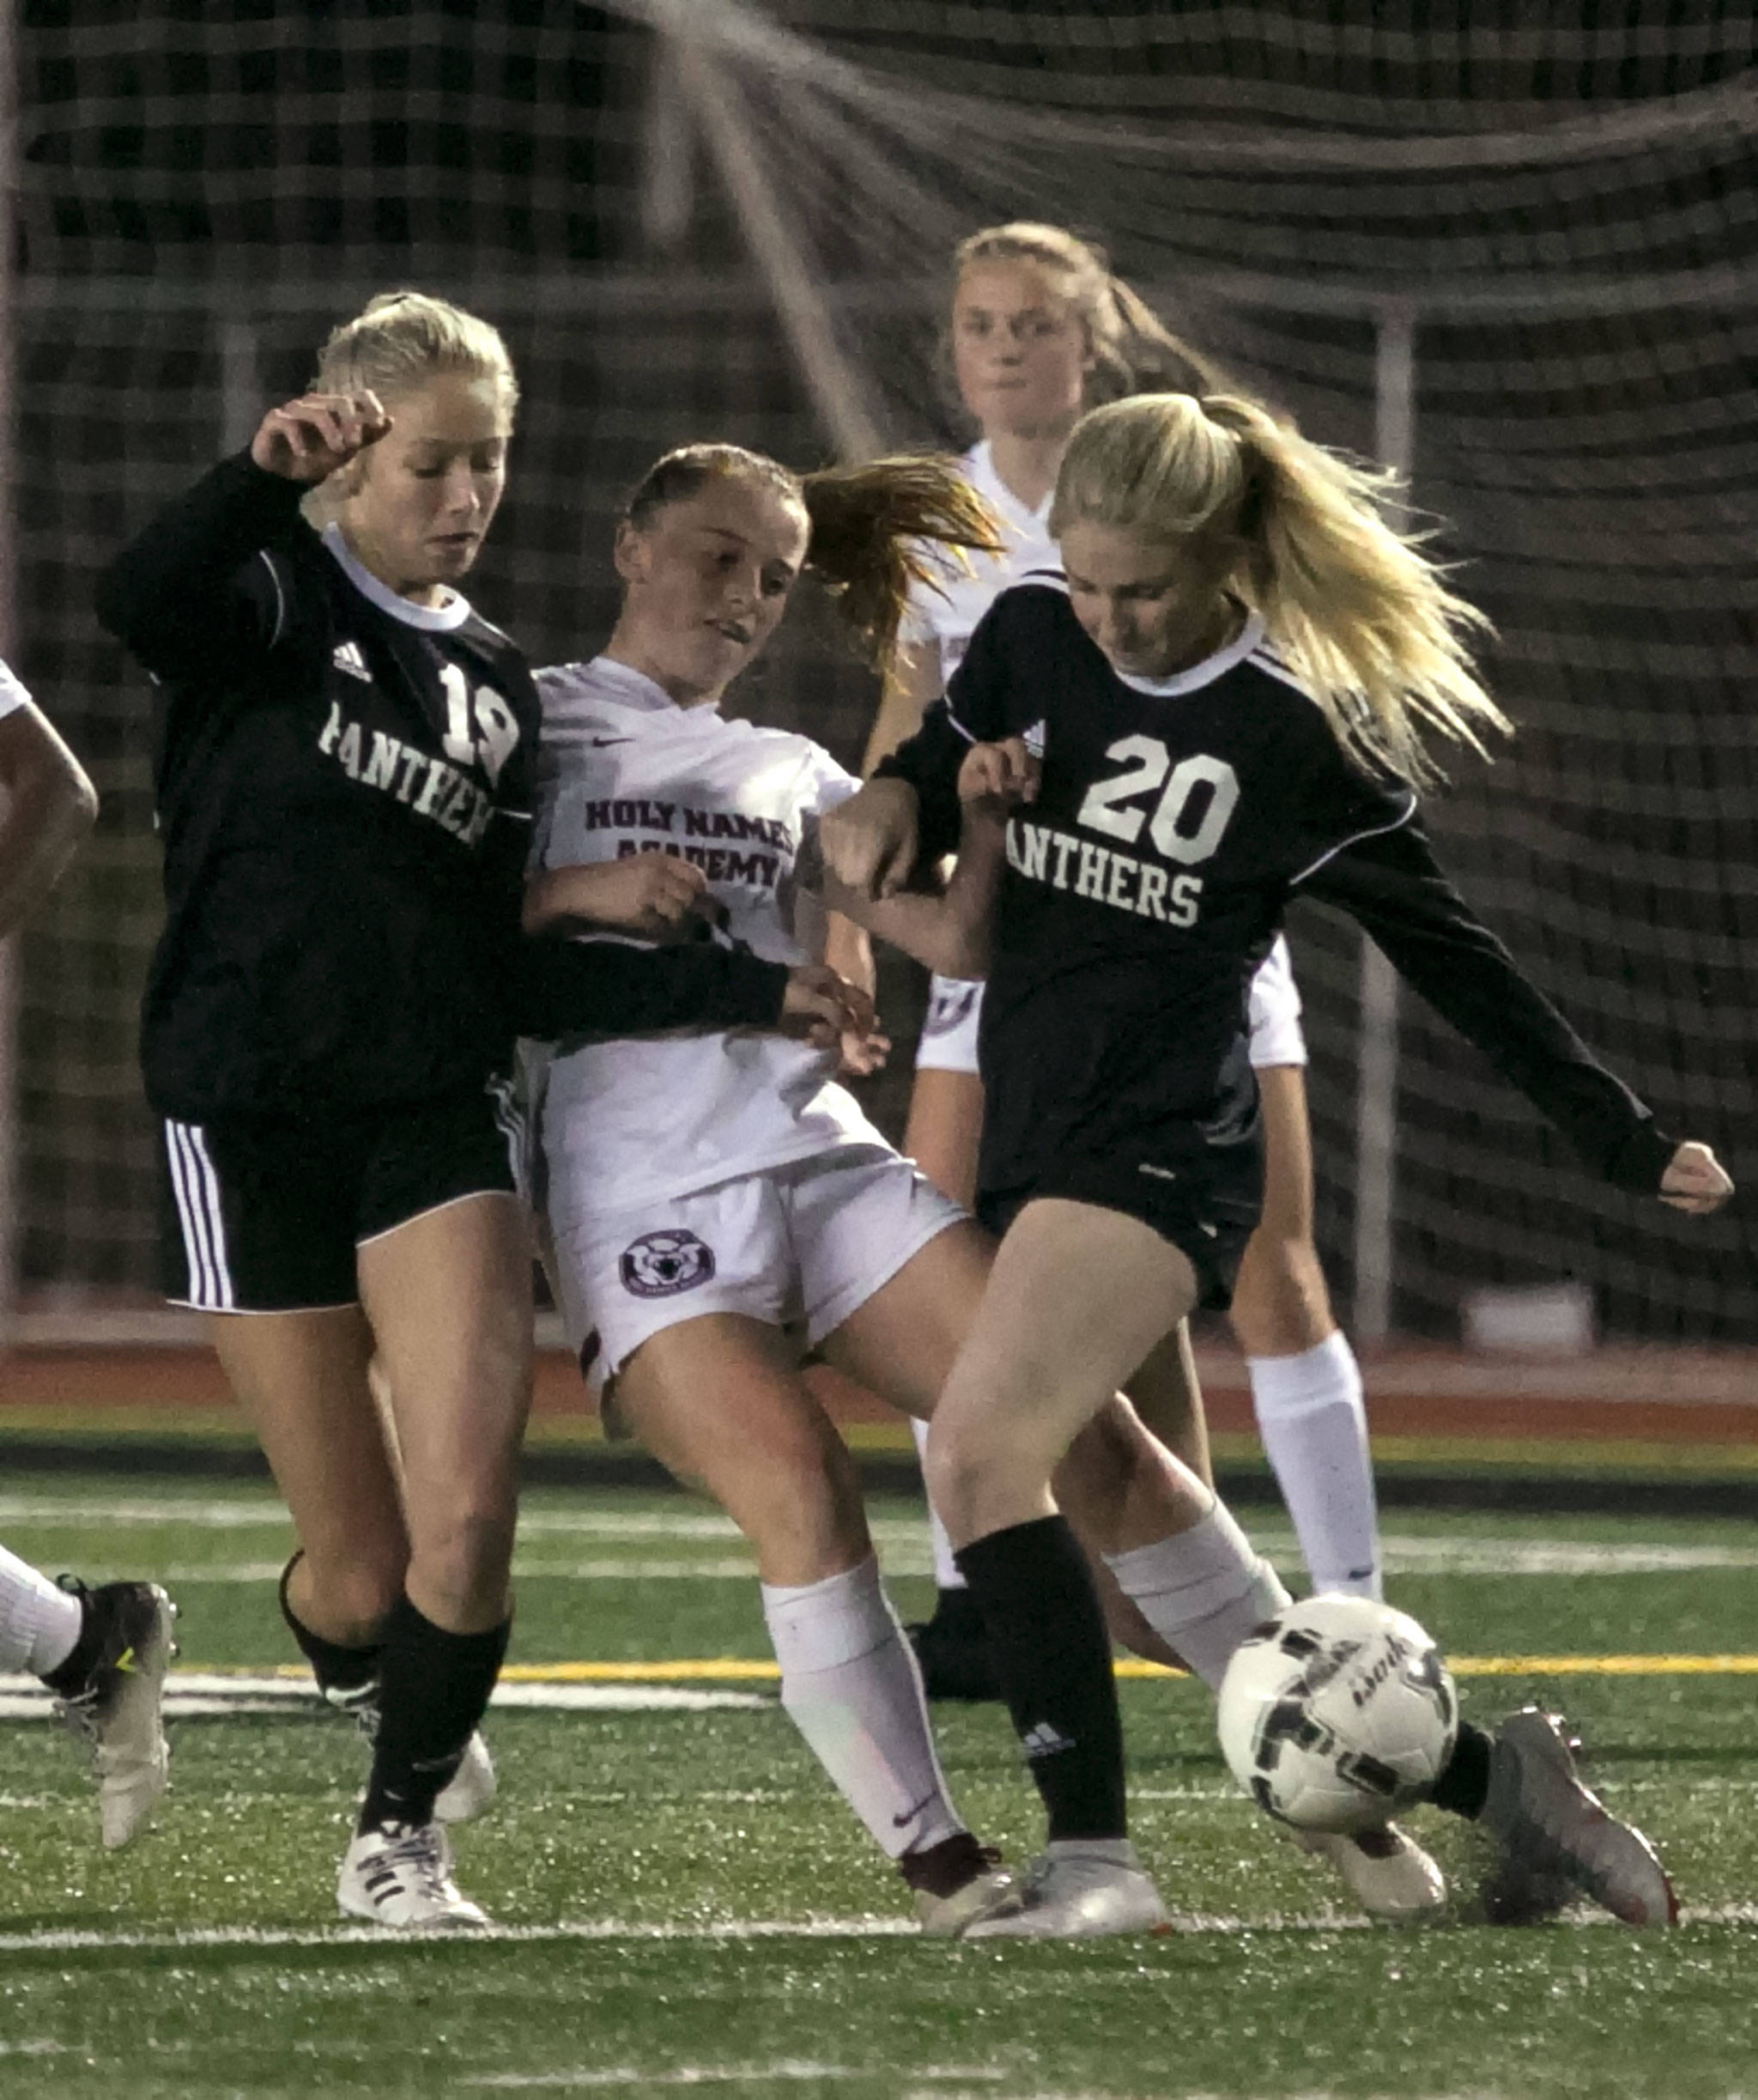 Snohomish’s Gracie Winders (left) and Jenna Schuler (right) crowd Holy Names Academy’s Hannah Gray (center) off the ball during a 3A State Tournament first-round match Wednesday at Veterans Memorial Stadium in Snohomish. (Kevin Clark / The Herald)